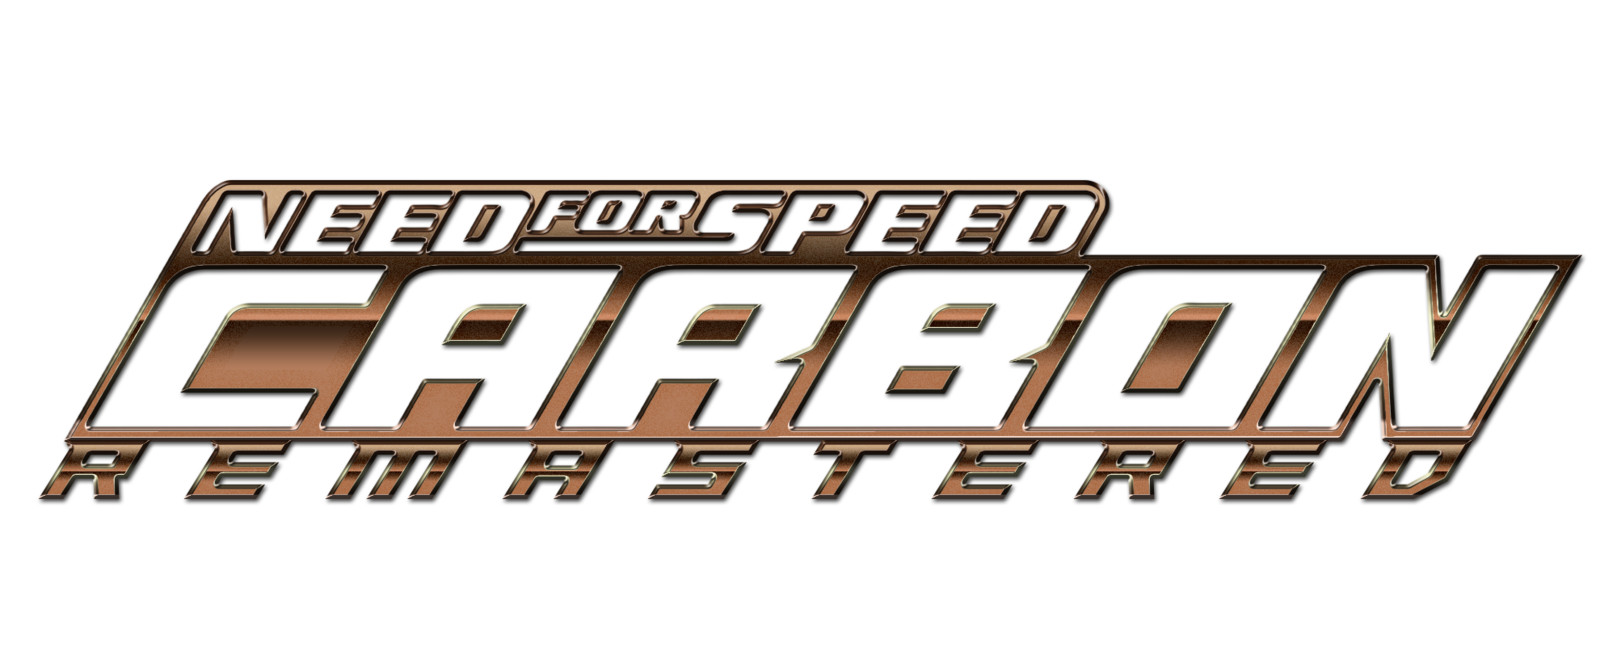 Need for Speed: Carbon Remastered - Logotype (Original)